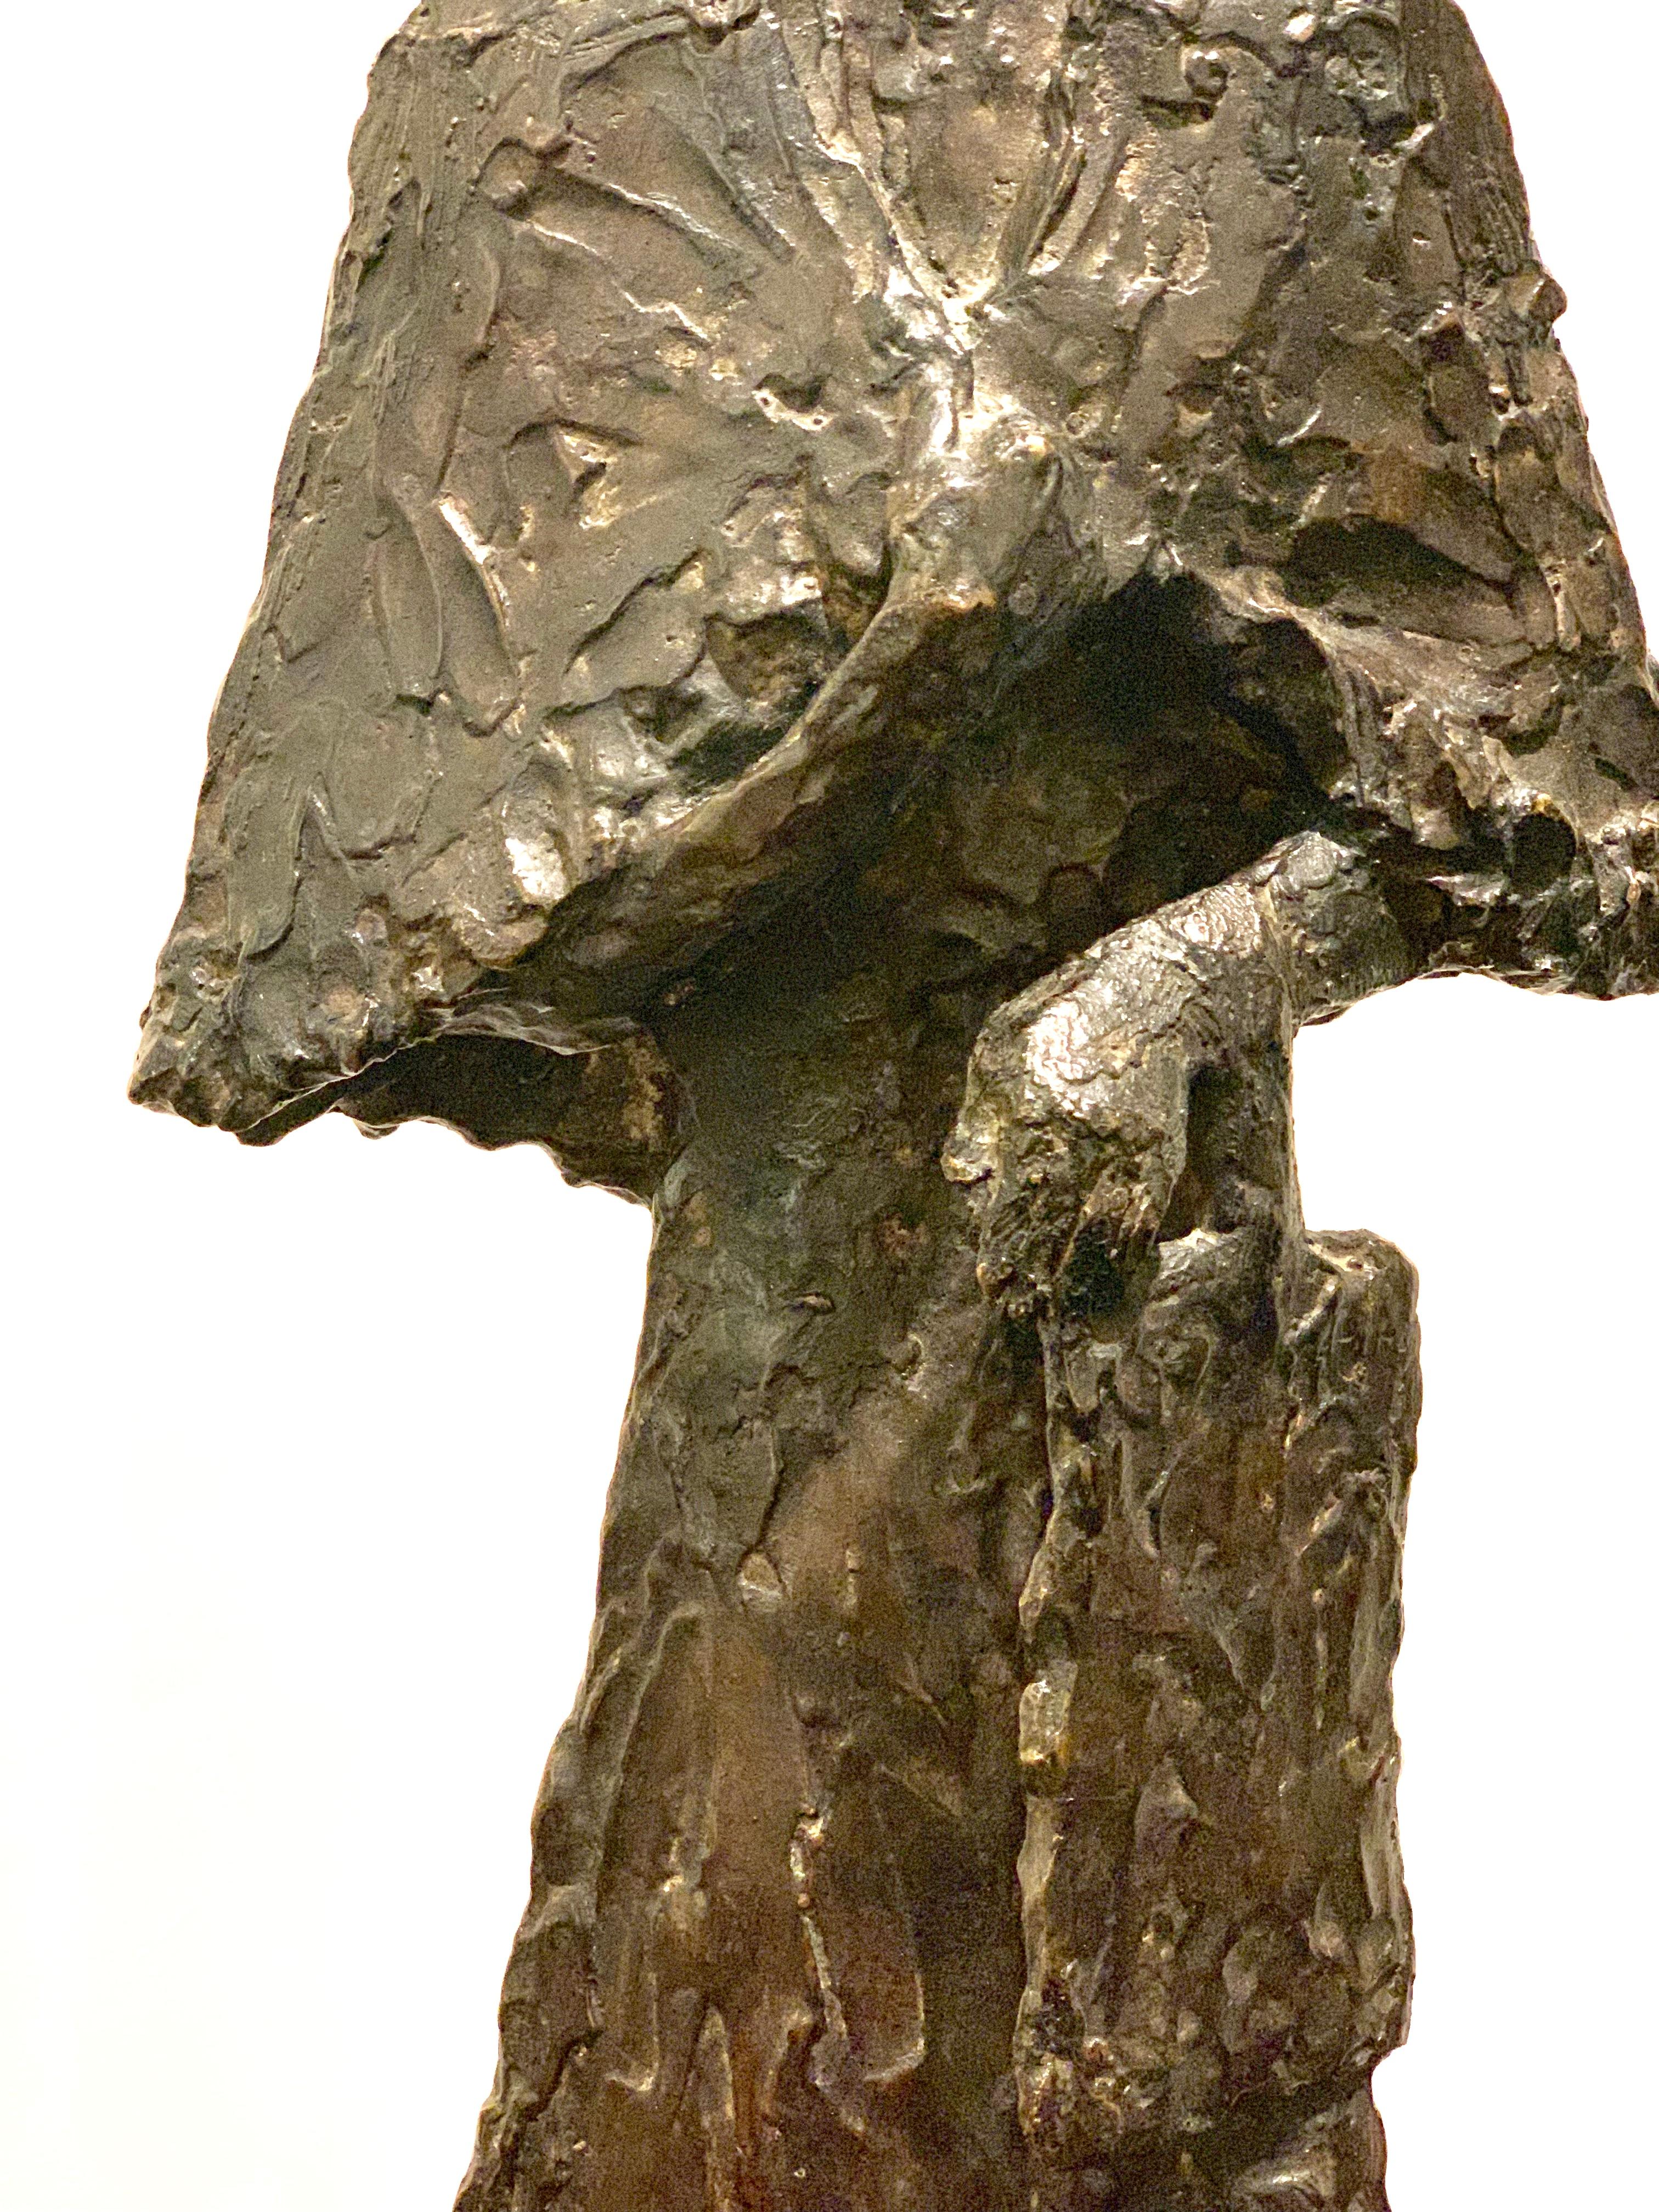 Bronze Sculpture Standing Woman - Brown Figurative Sculpture by Lily Shore